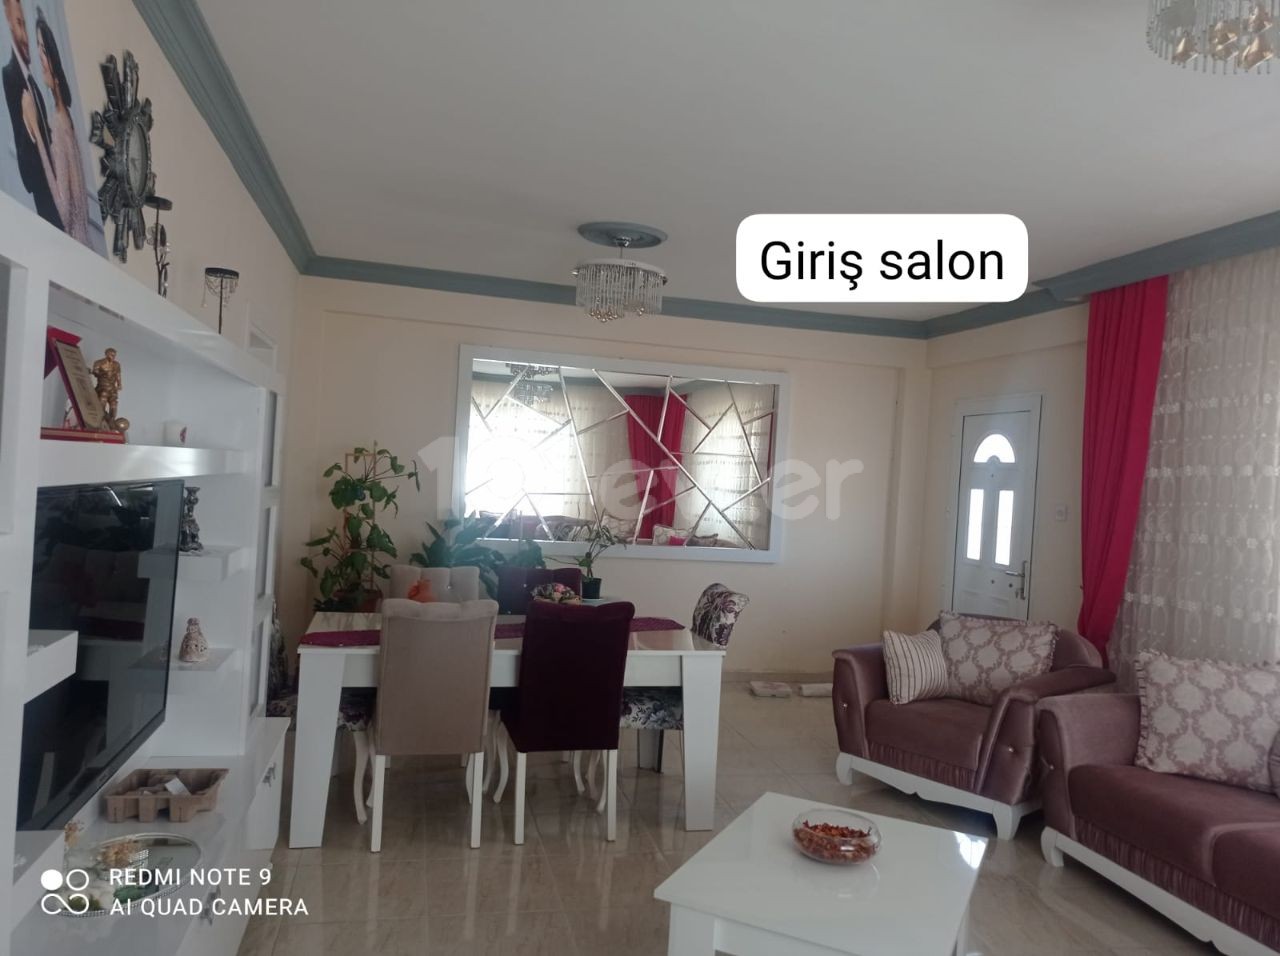 3 detached houses for sale in alayköy area will not be sold separately